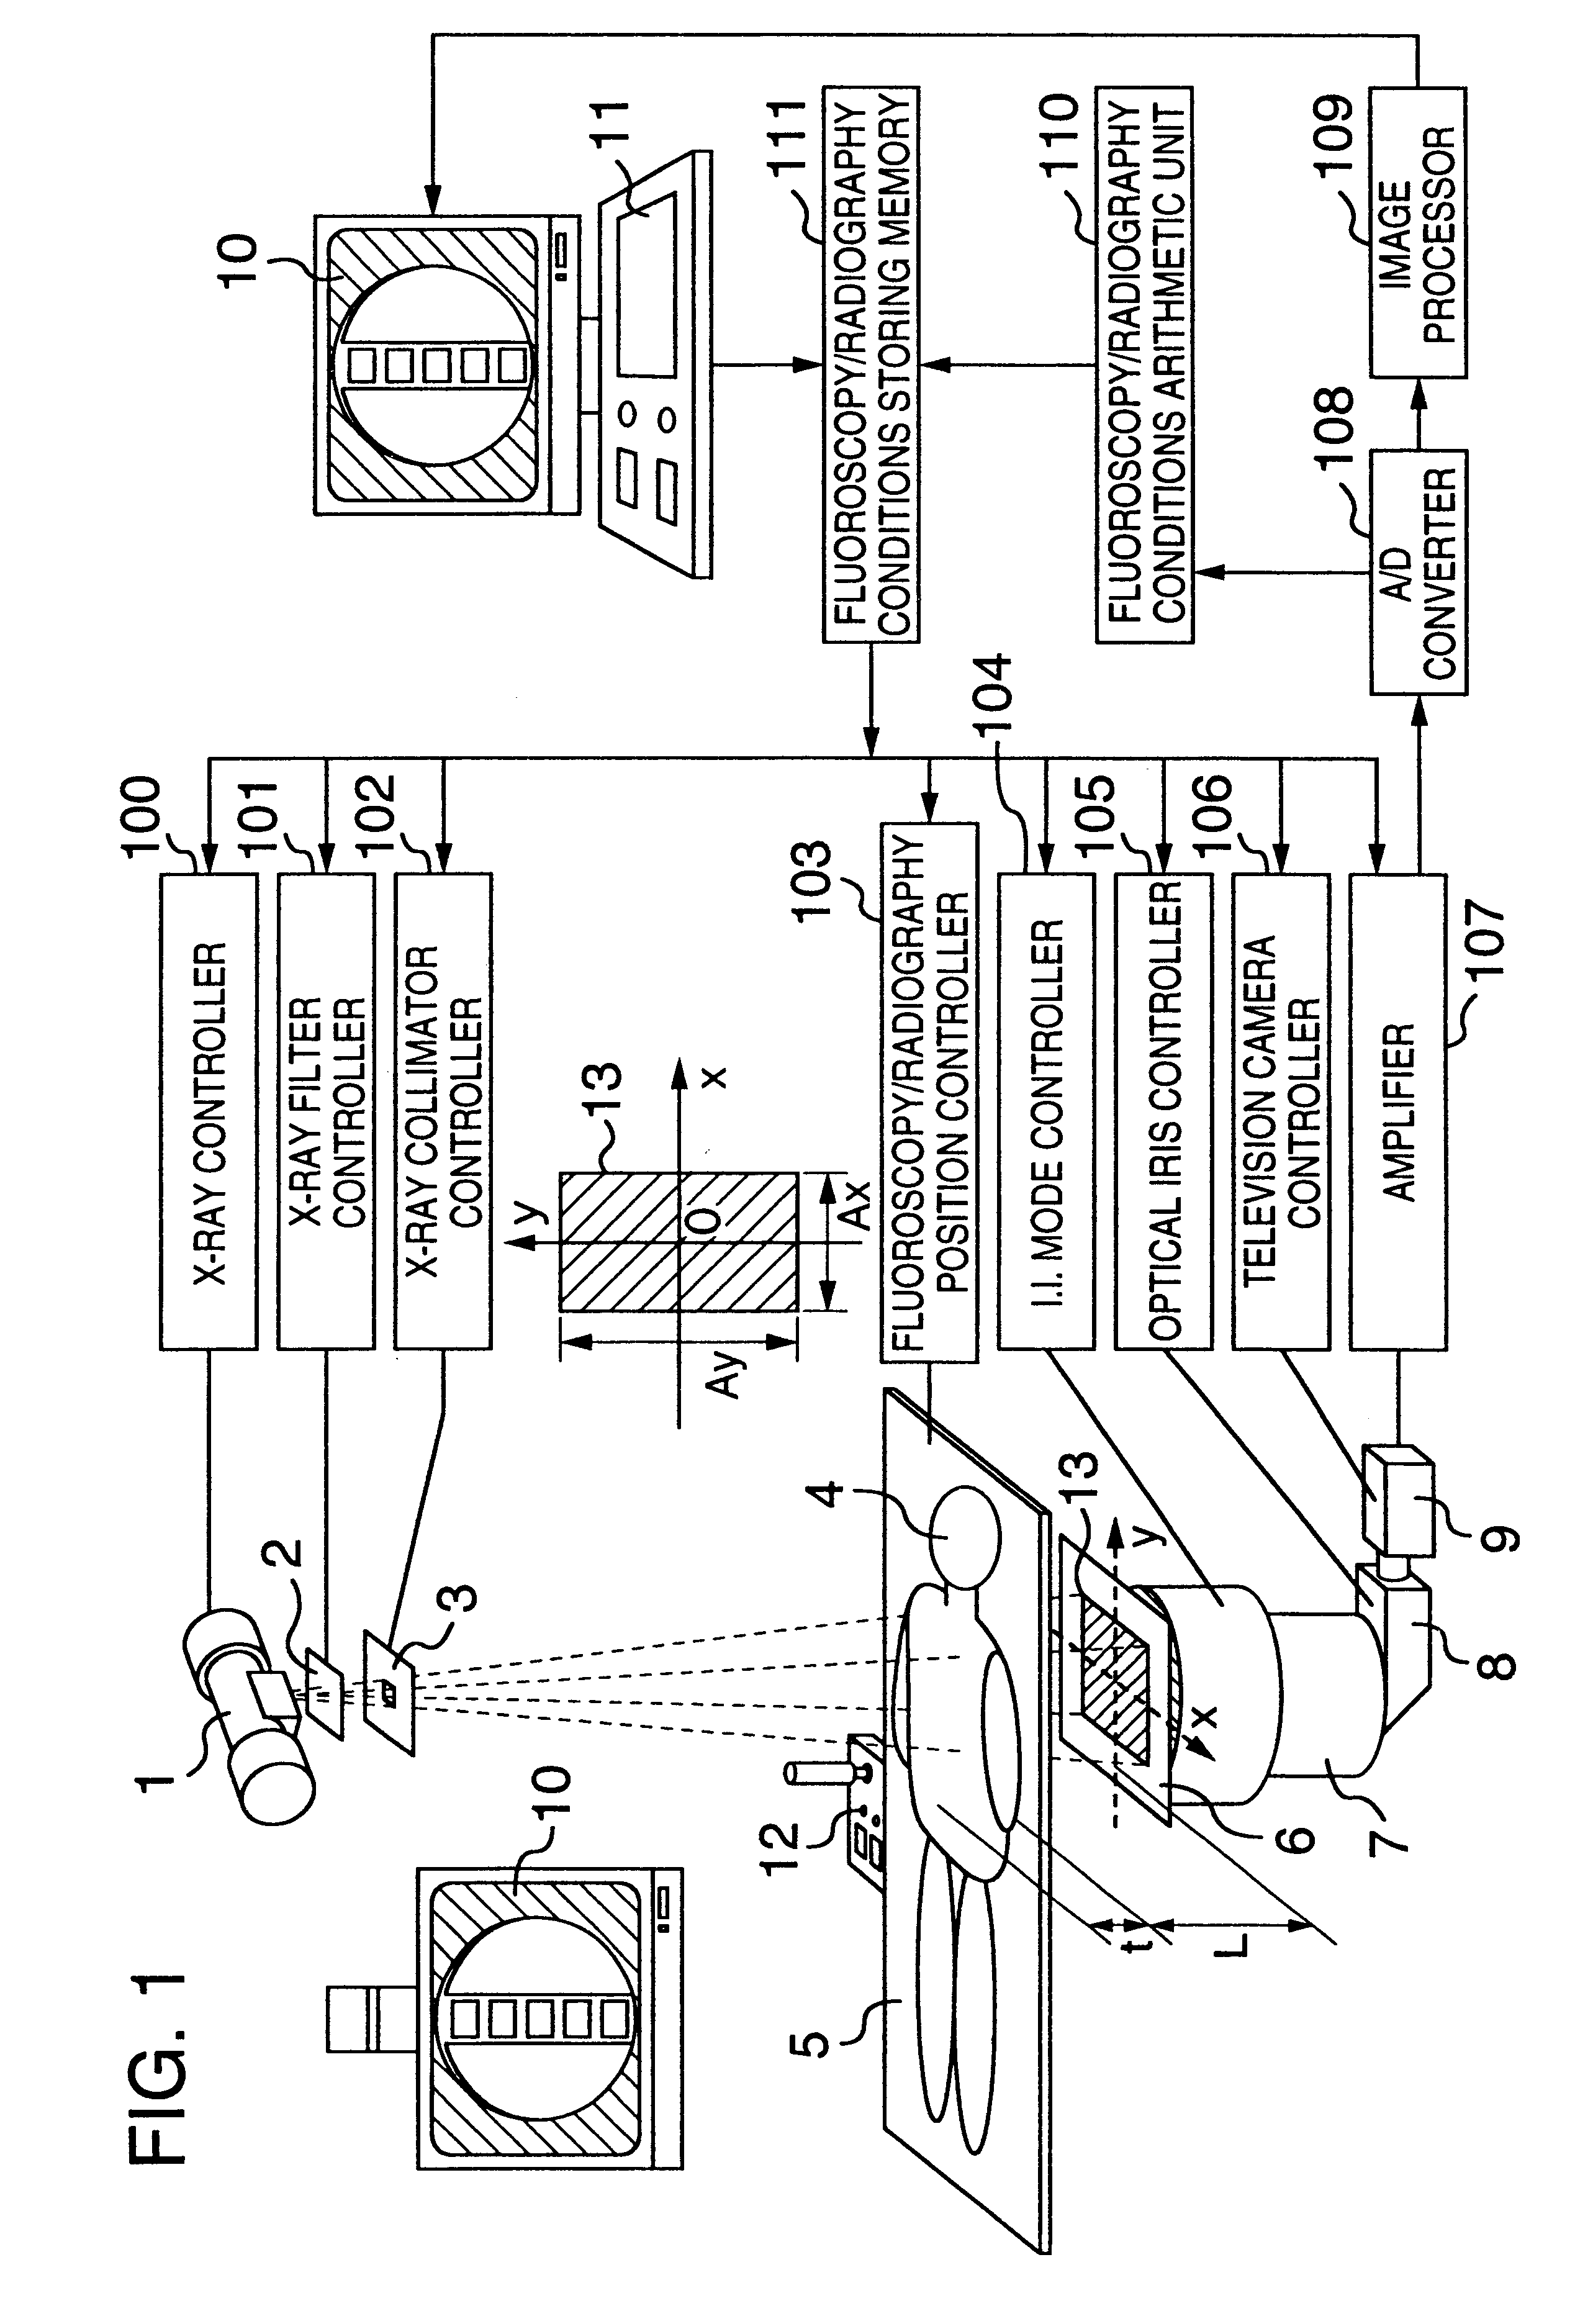 X-ray control method and x-ray apparatus